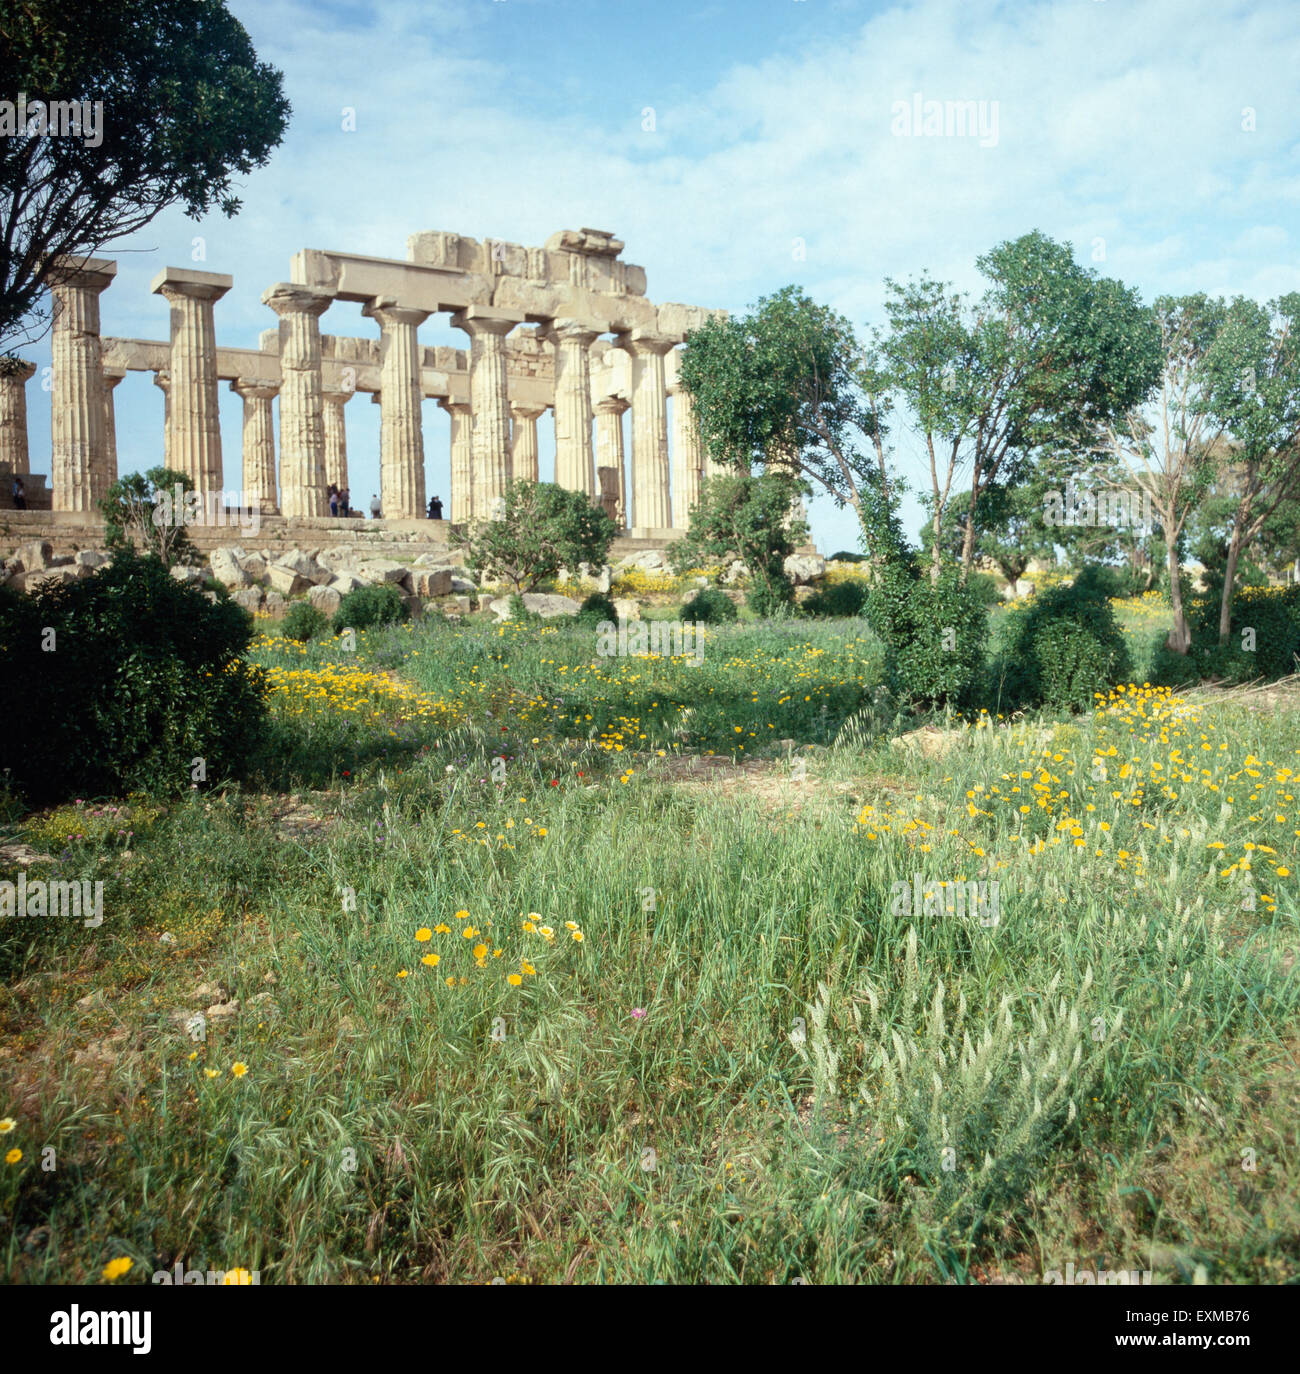 Der Heratempel der archäologischen Fundstätte Selinunt auf Sizilien, Italien 1970er Jahre. The temple of Hera of the archaeological site Selinunt of Sicily, Italy 1970s. Stock Photo